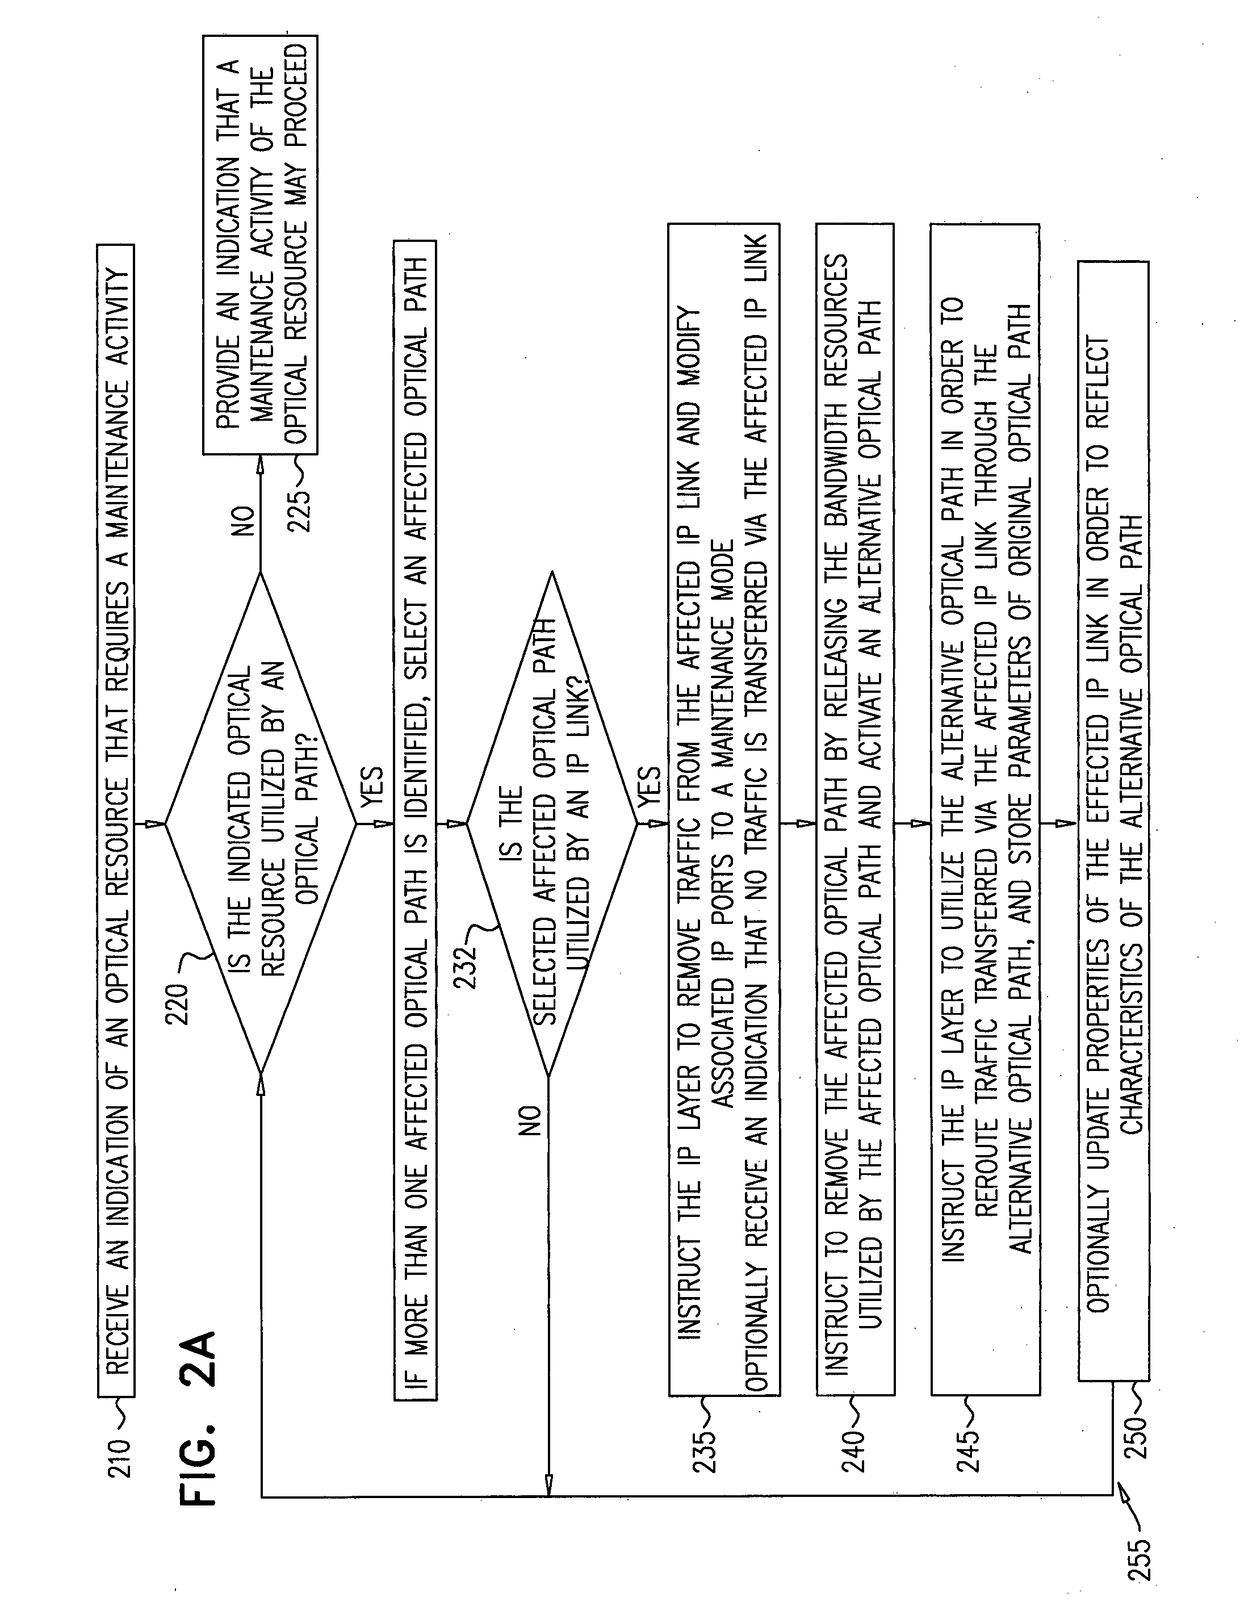 Systems and methods for managing multi-layer communication networks